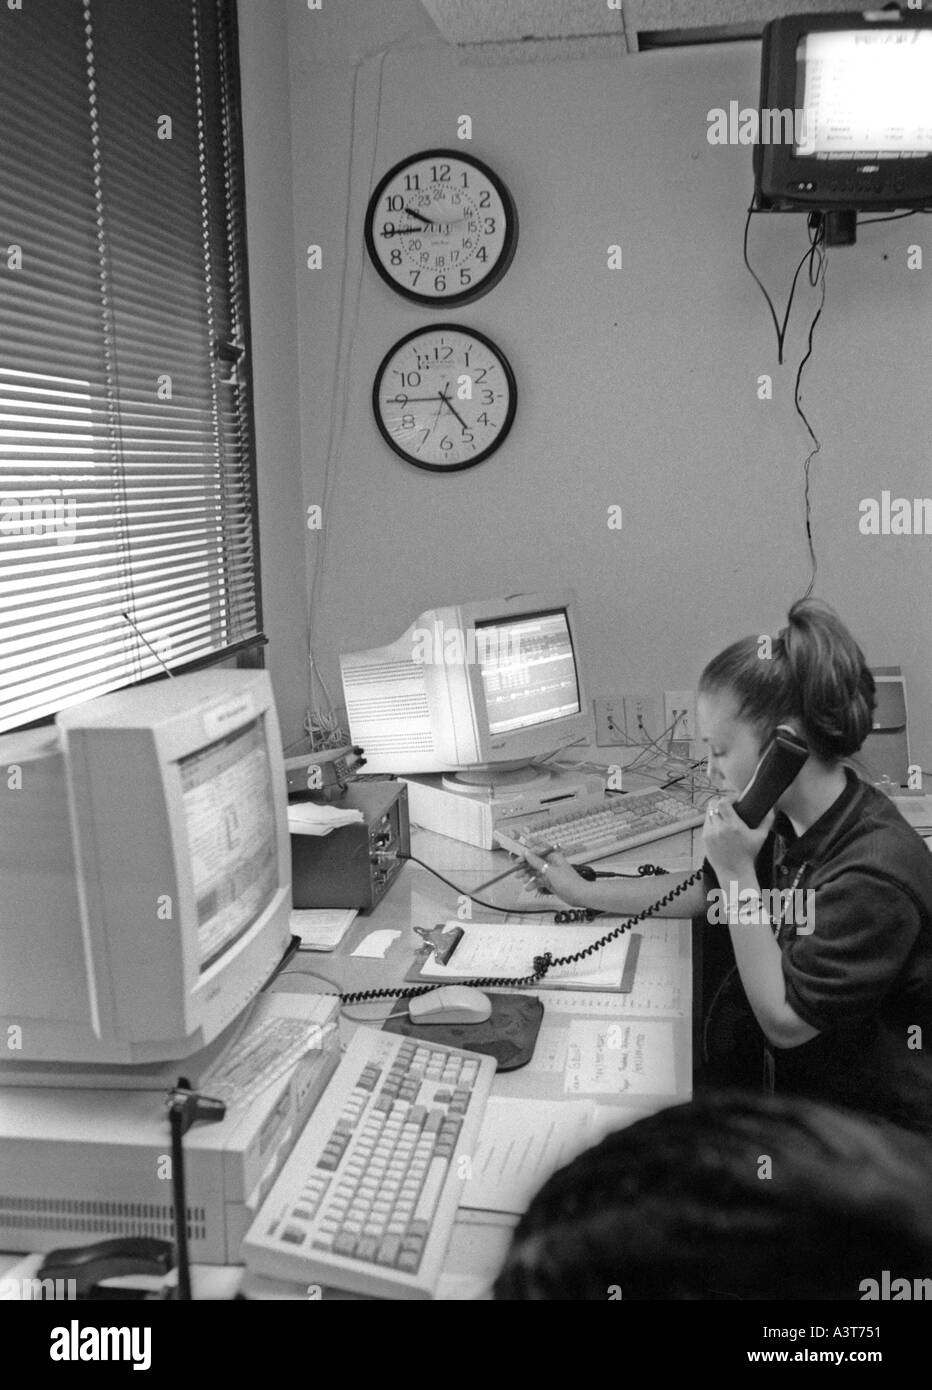 Worker in an operations center for Pro Air airline Stock Photo